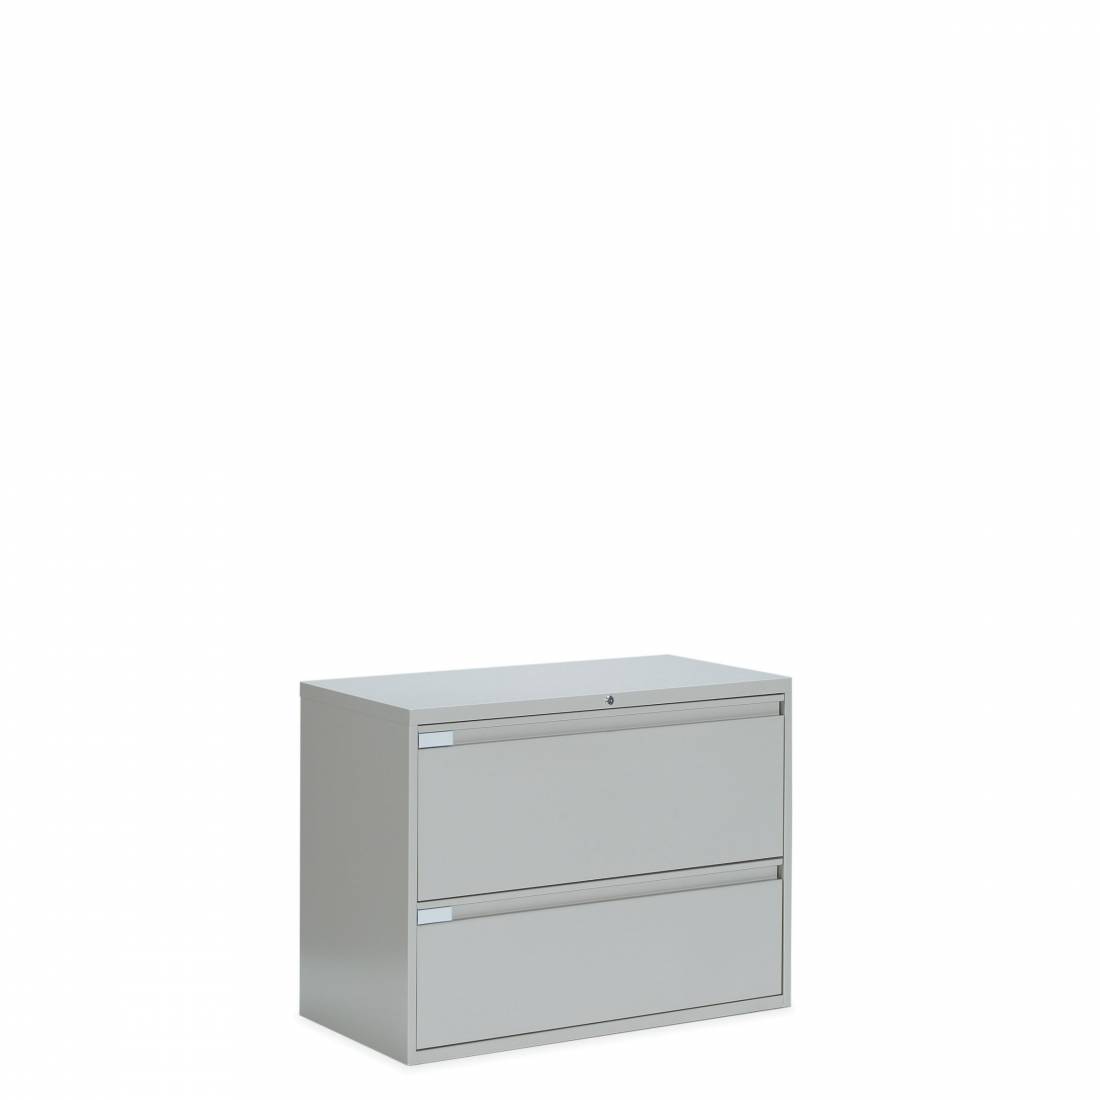 36”W 2 Drawer Lateral File